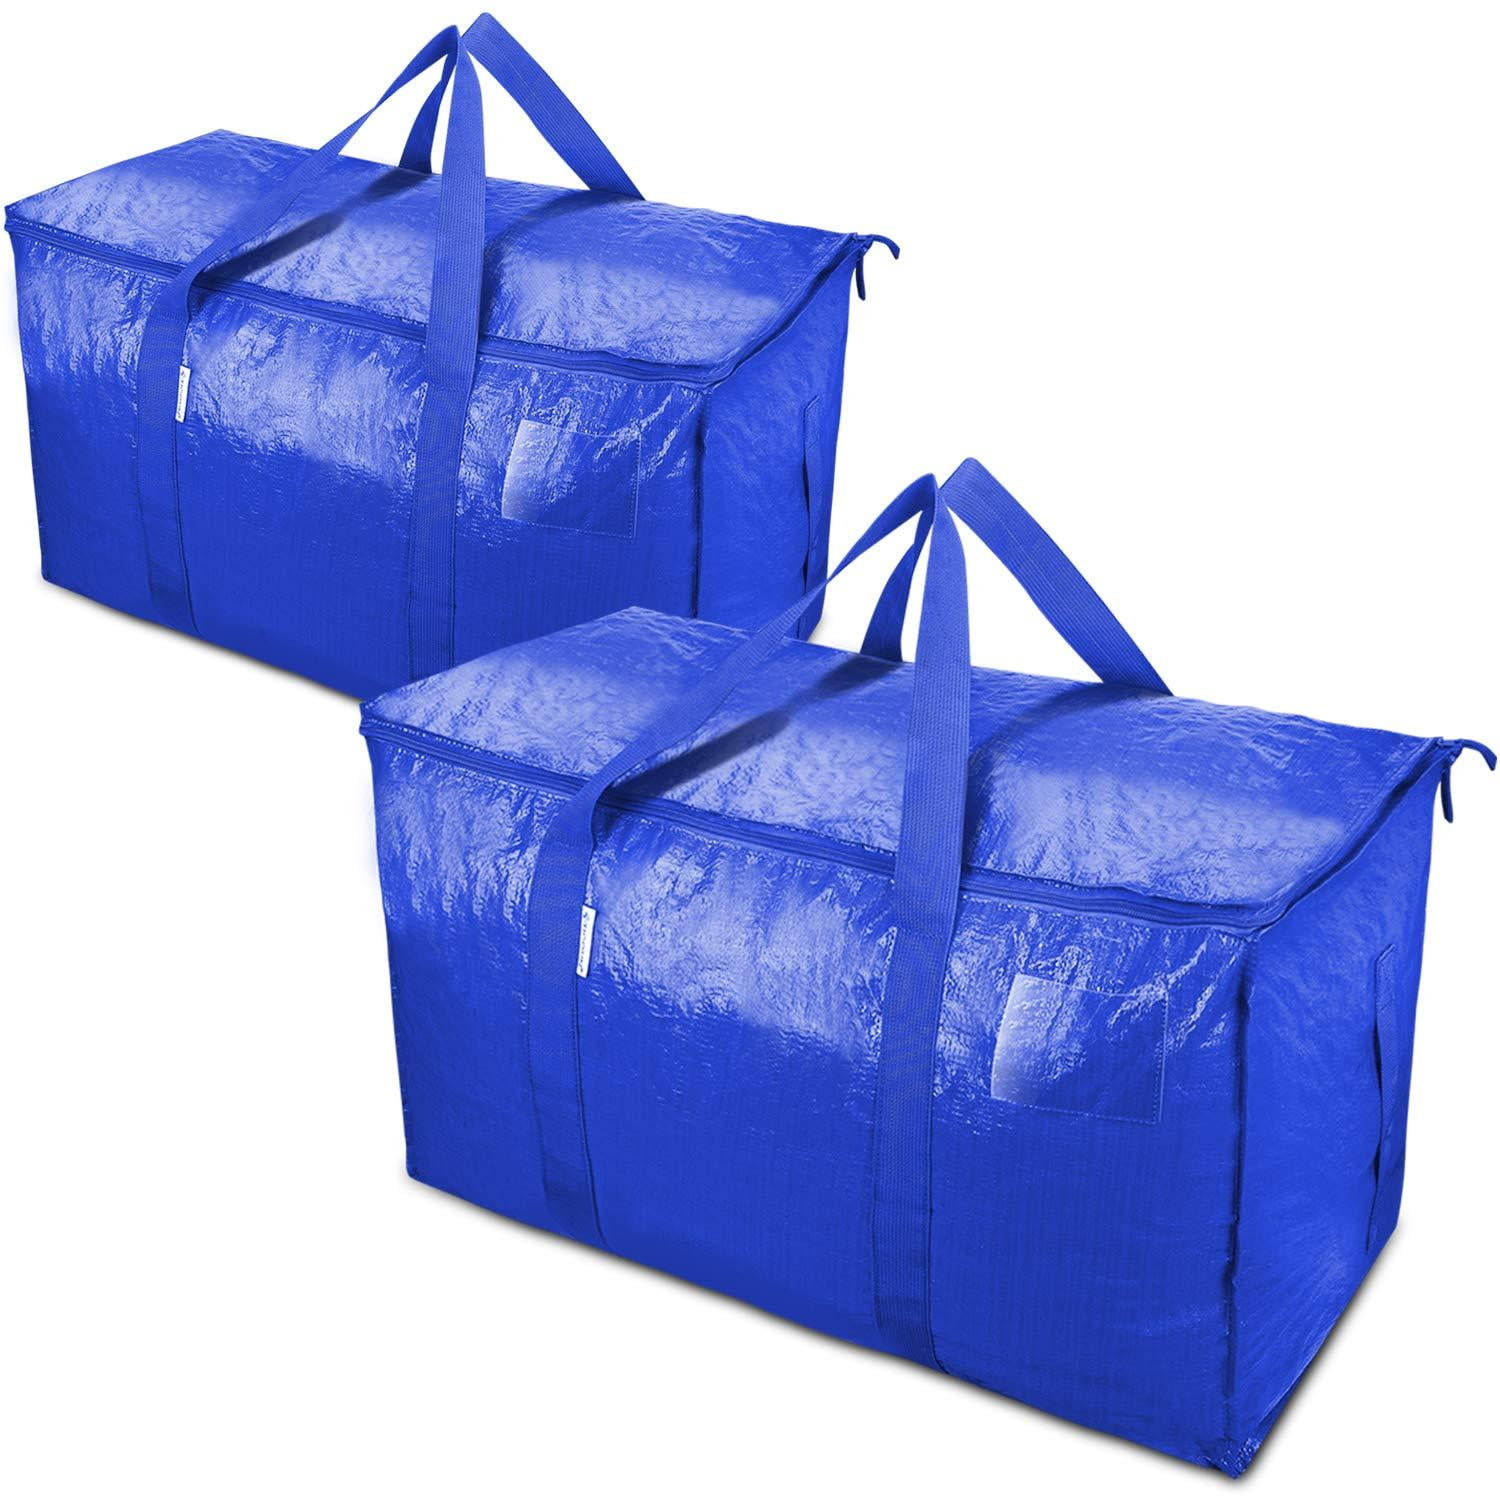 TICONN 6 Pack Extra Large Moving Bags with Zippers & Carrying Handles Blue Heavy-Duty Storage Tote for Space Saving Moving Storage 